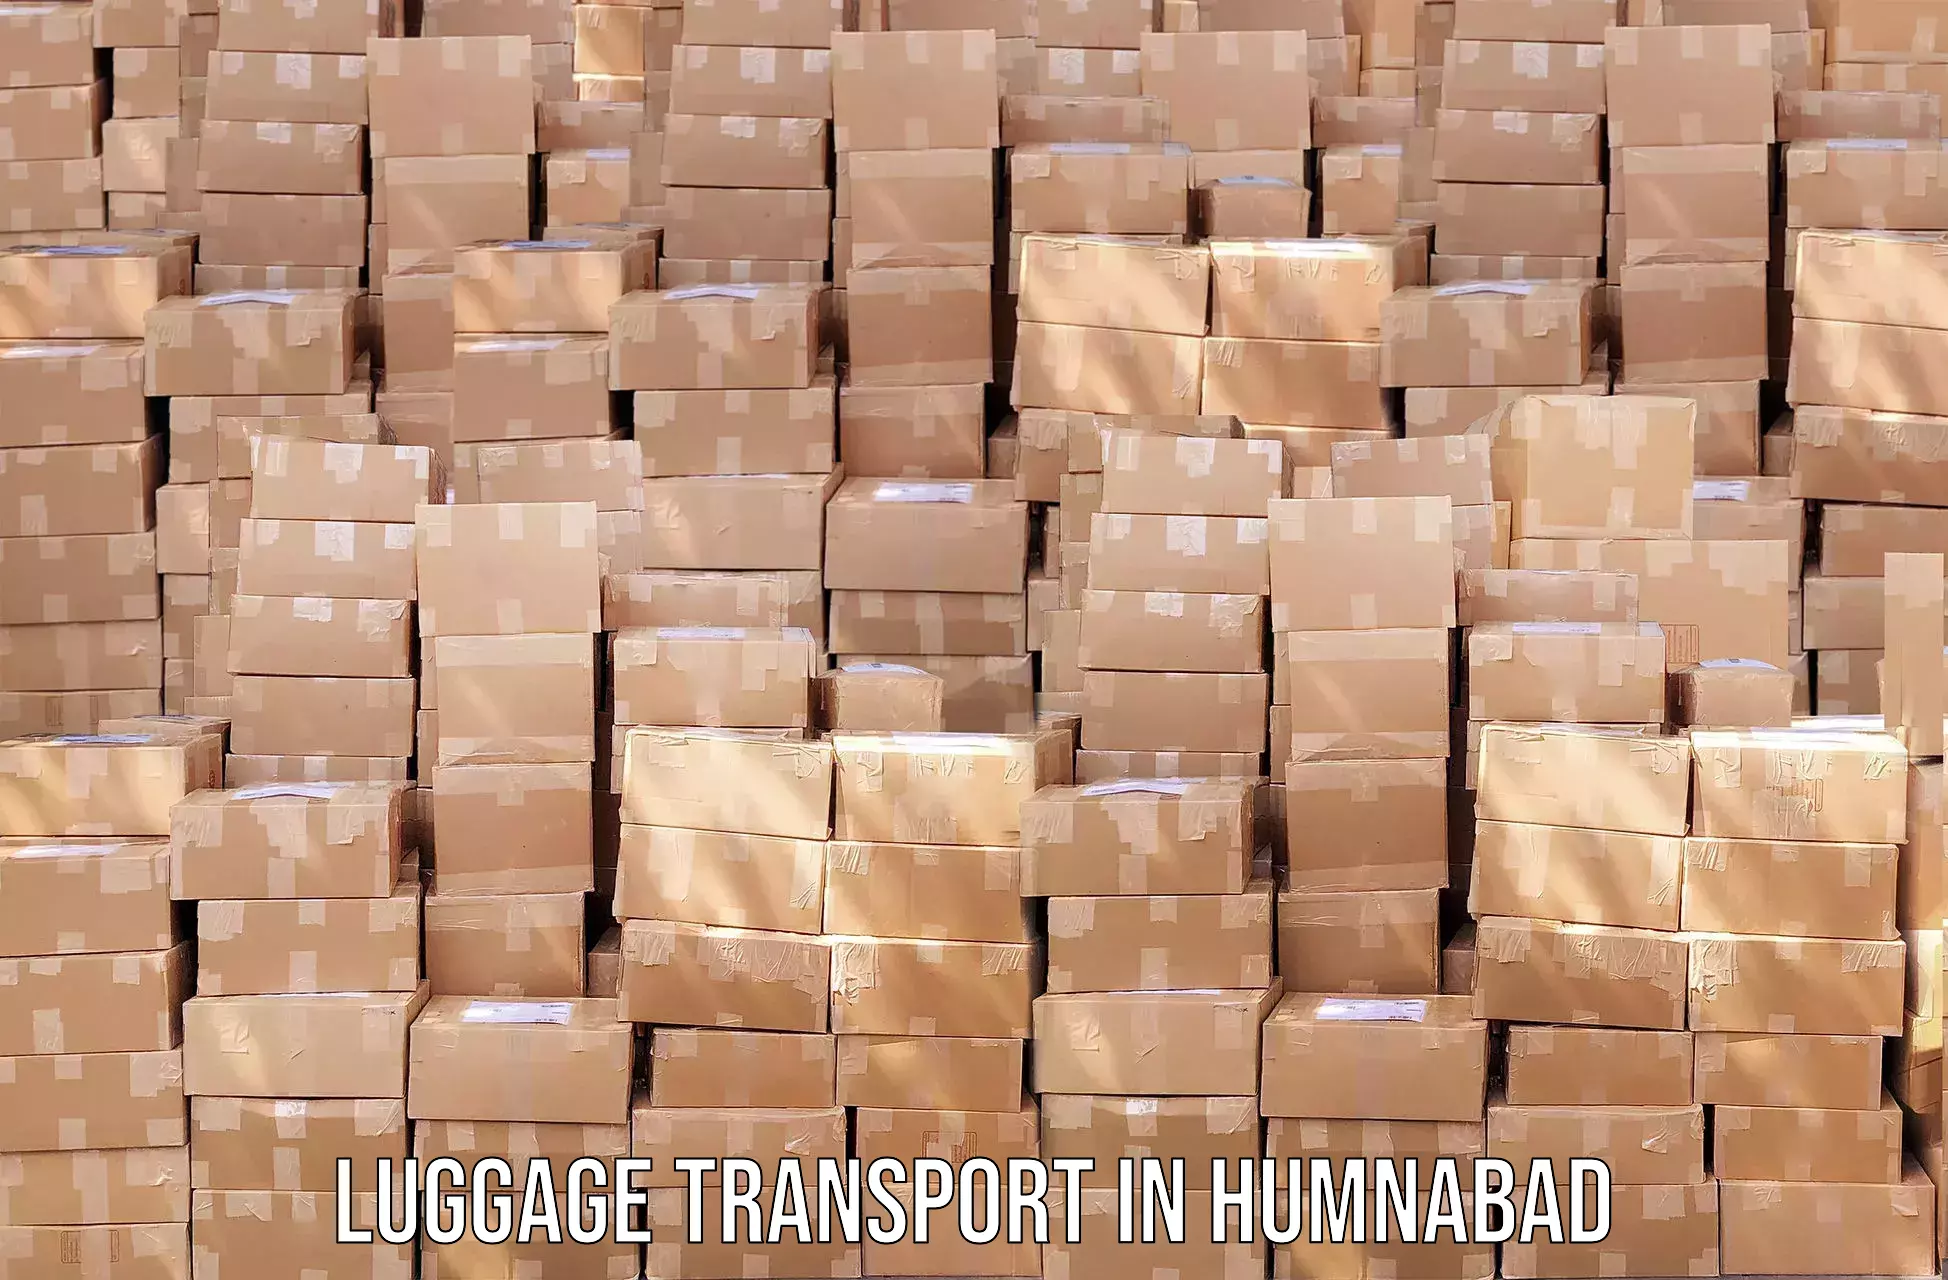 Luggage transport consulting in Humnabad